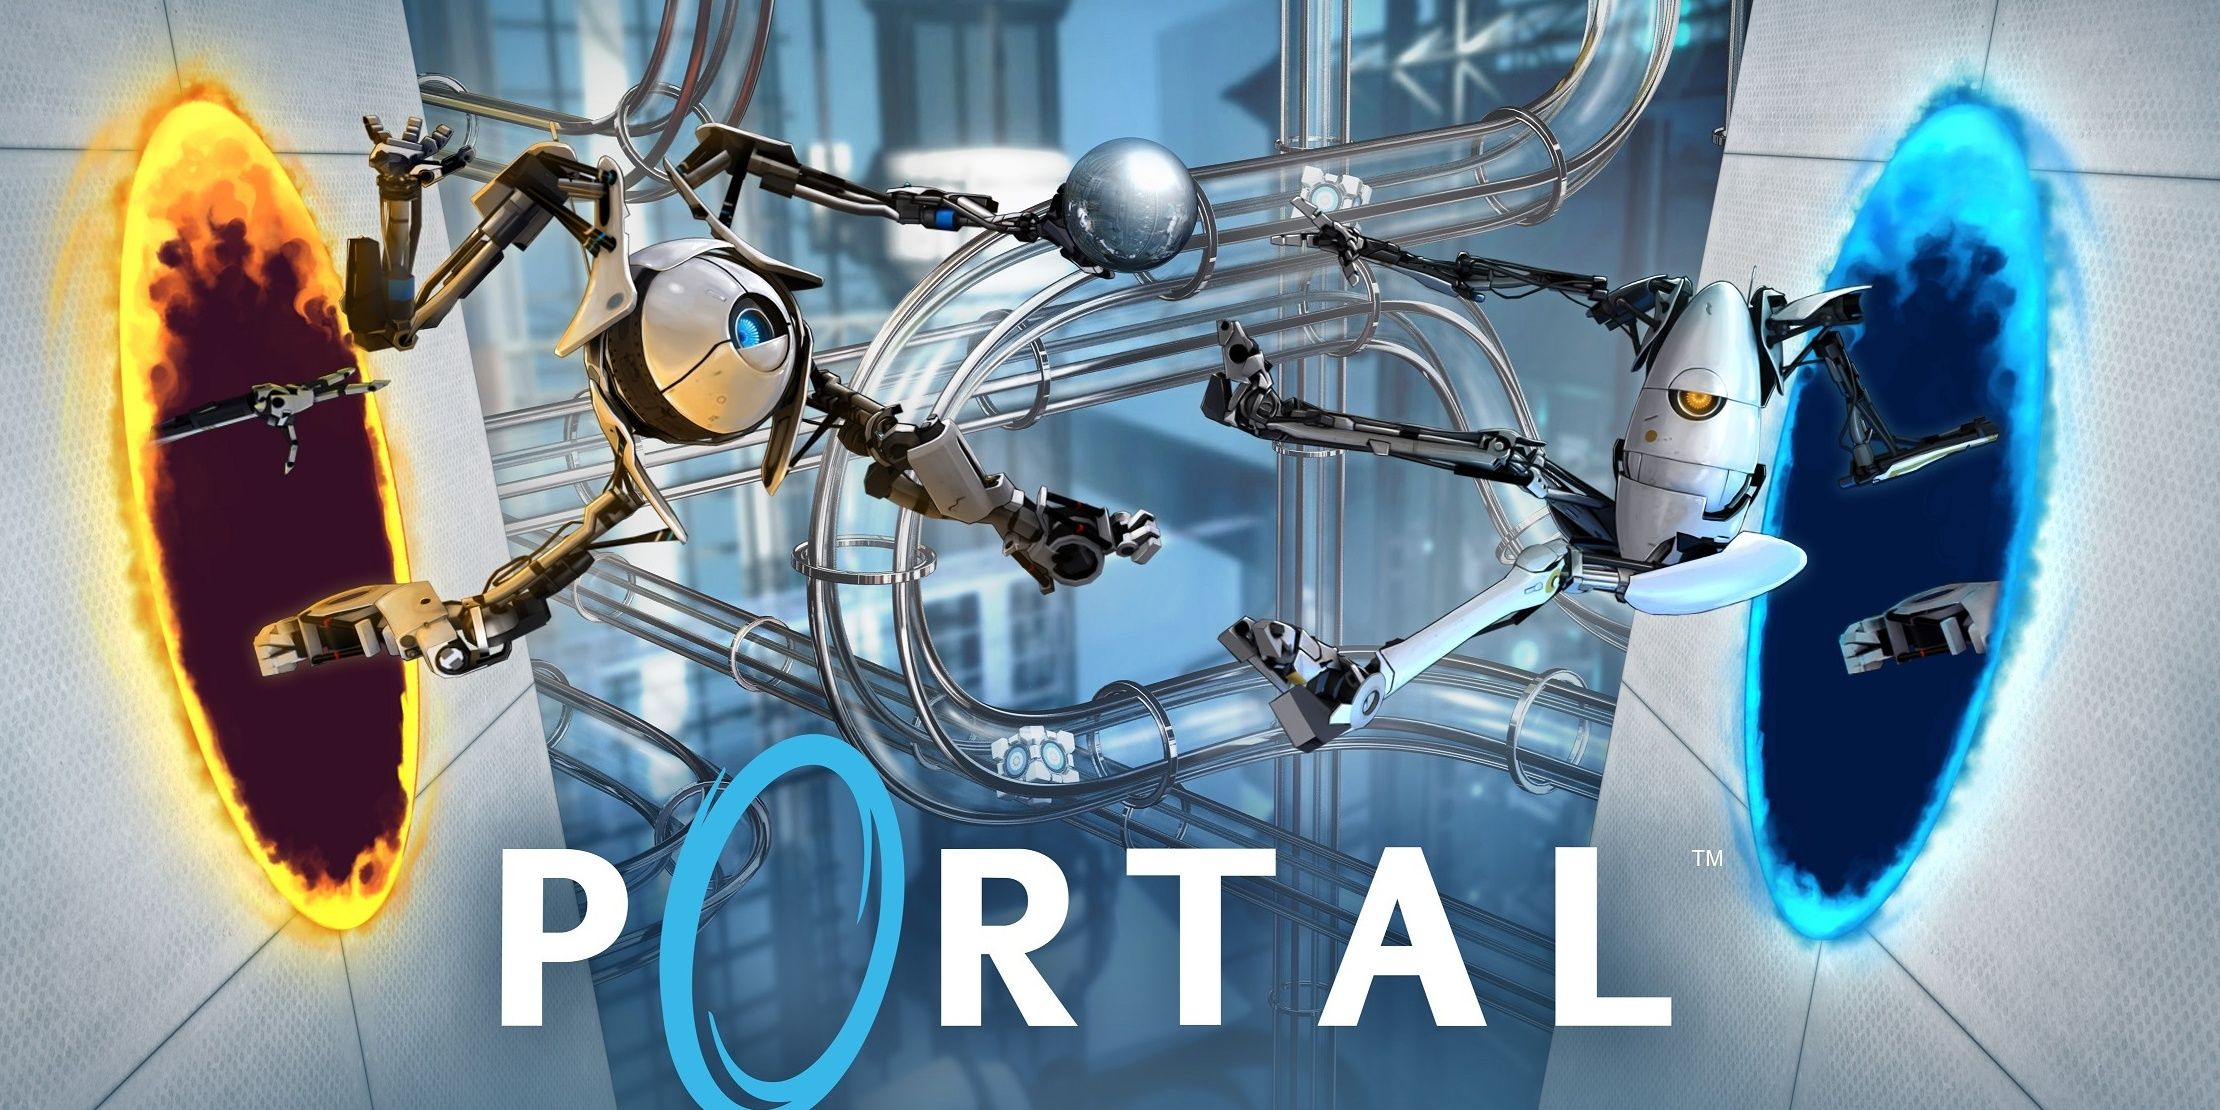 poster for the video game Portal featuring two robots passing through two portals